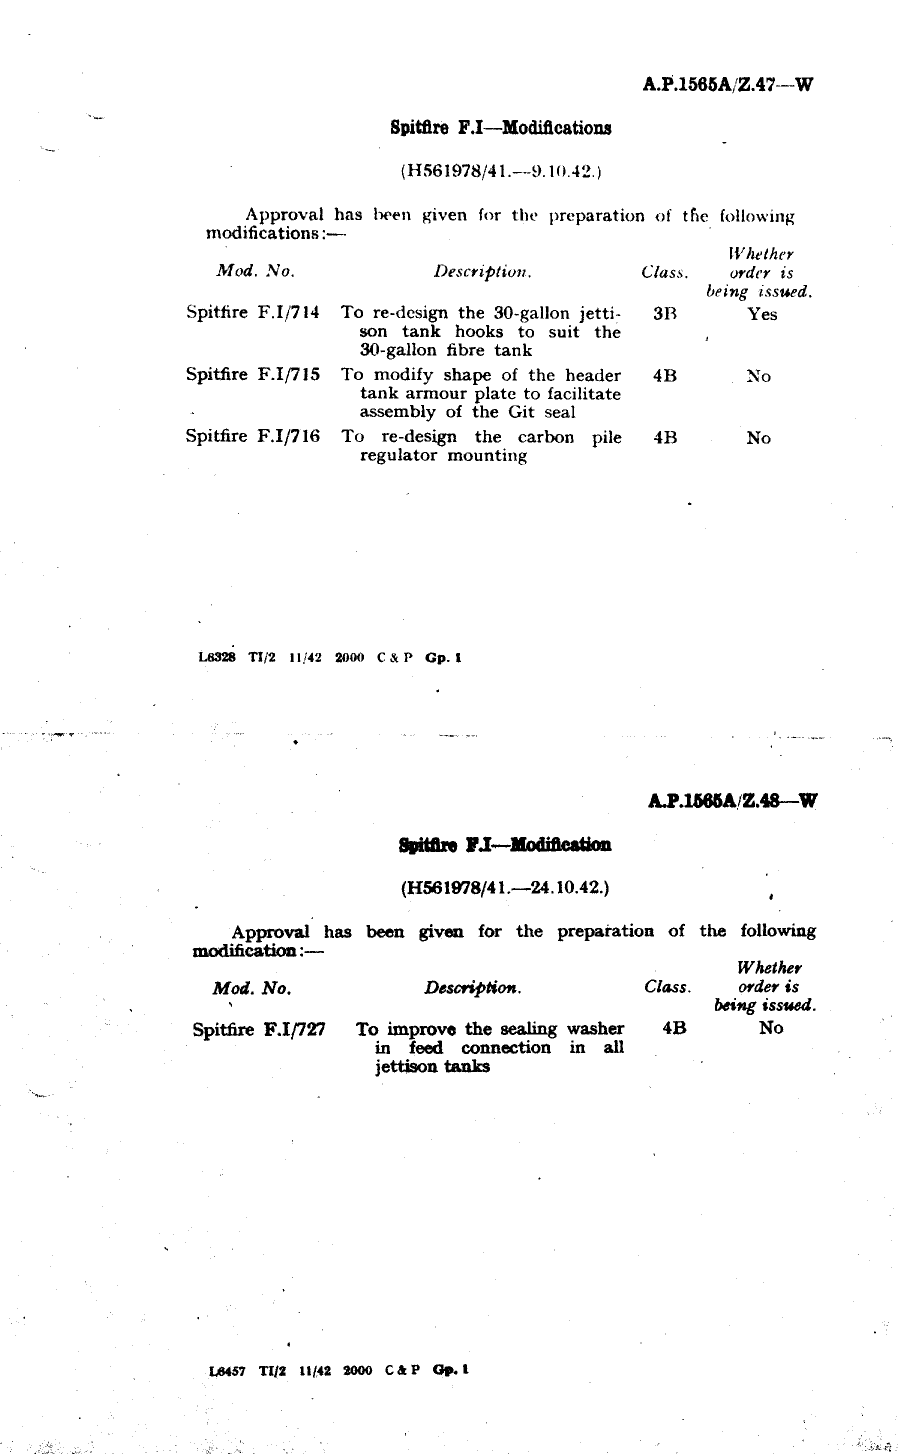 Sample page 1 from AirCorps Library document: Spitfire F.I Modifications 714, 715, and 716